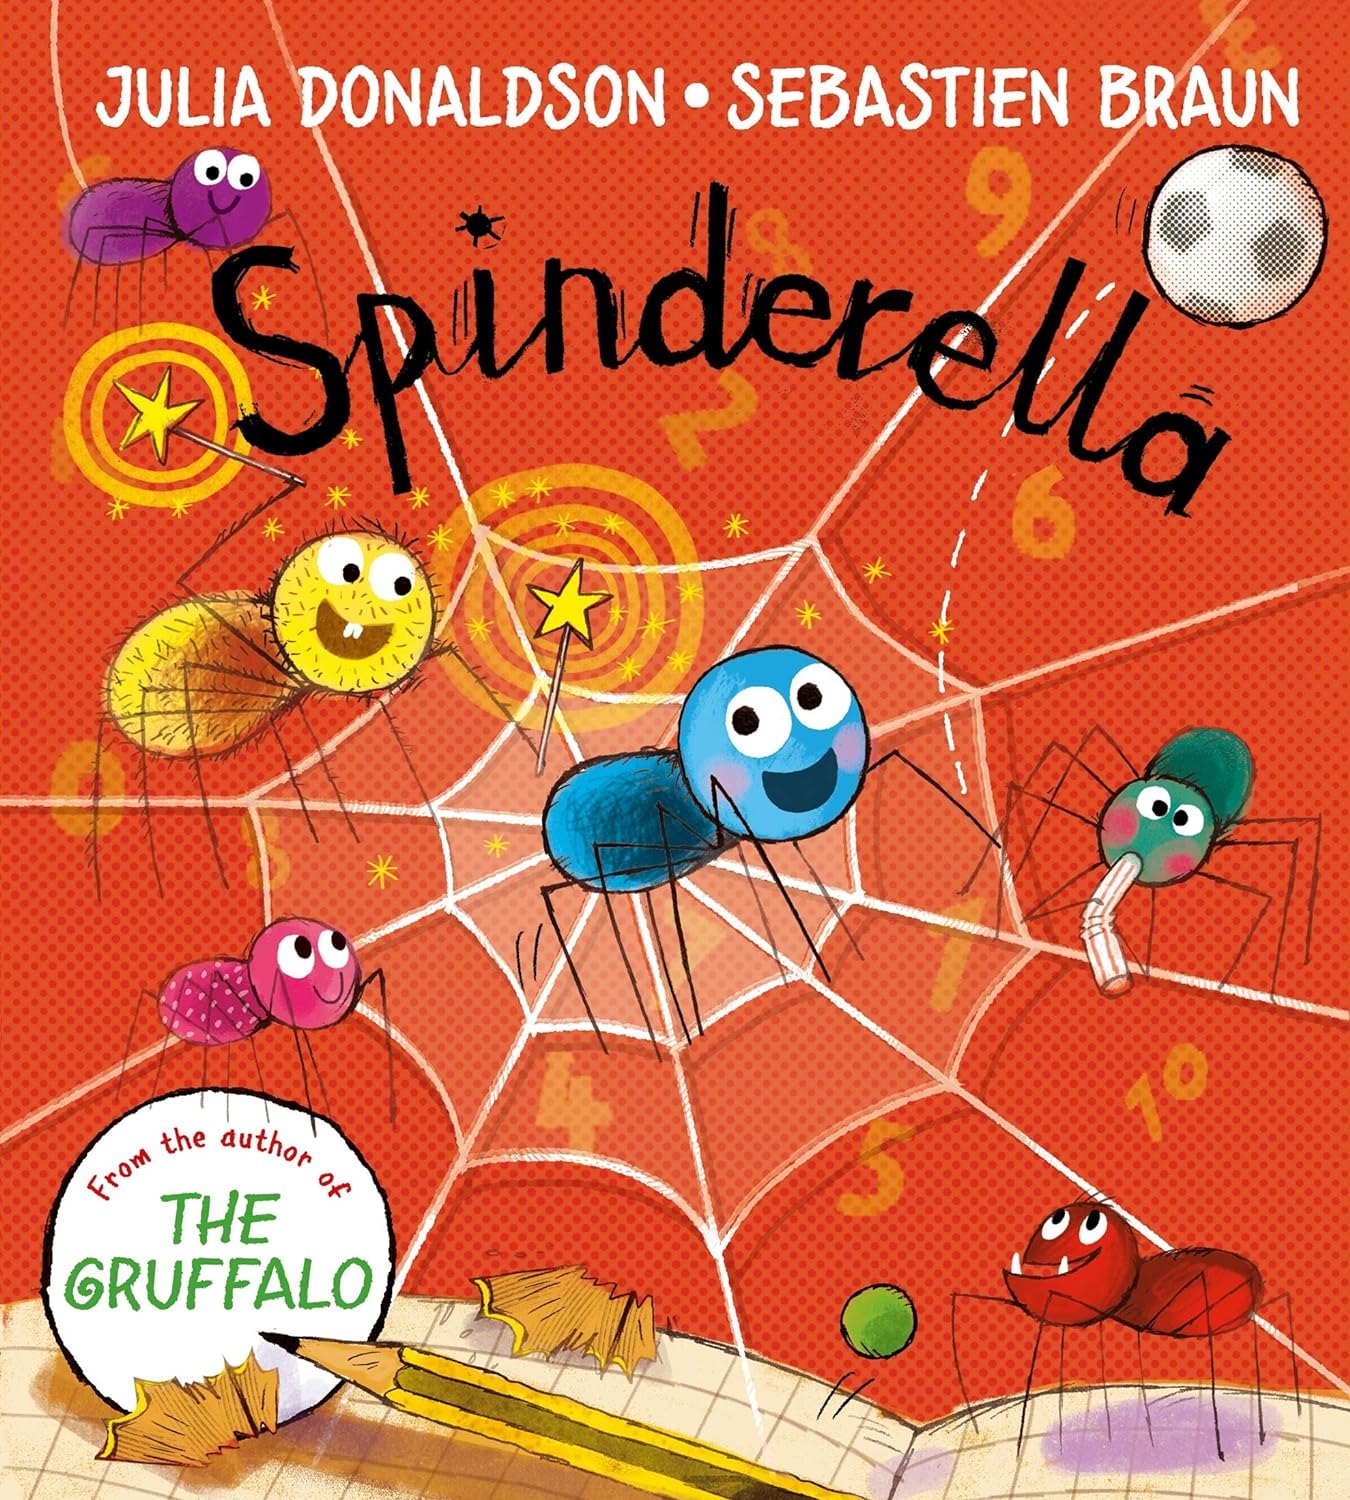 Spinderella board book: The perfect Halloween illustrated children’s picture book from the author of The Gruffalo and Tales From Acorn Wood!